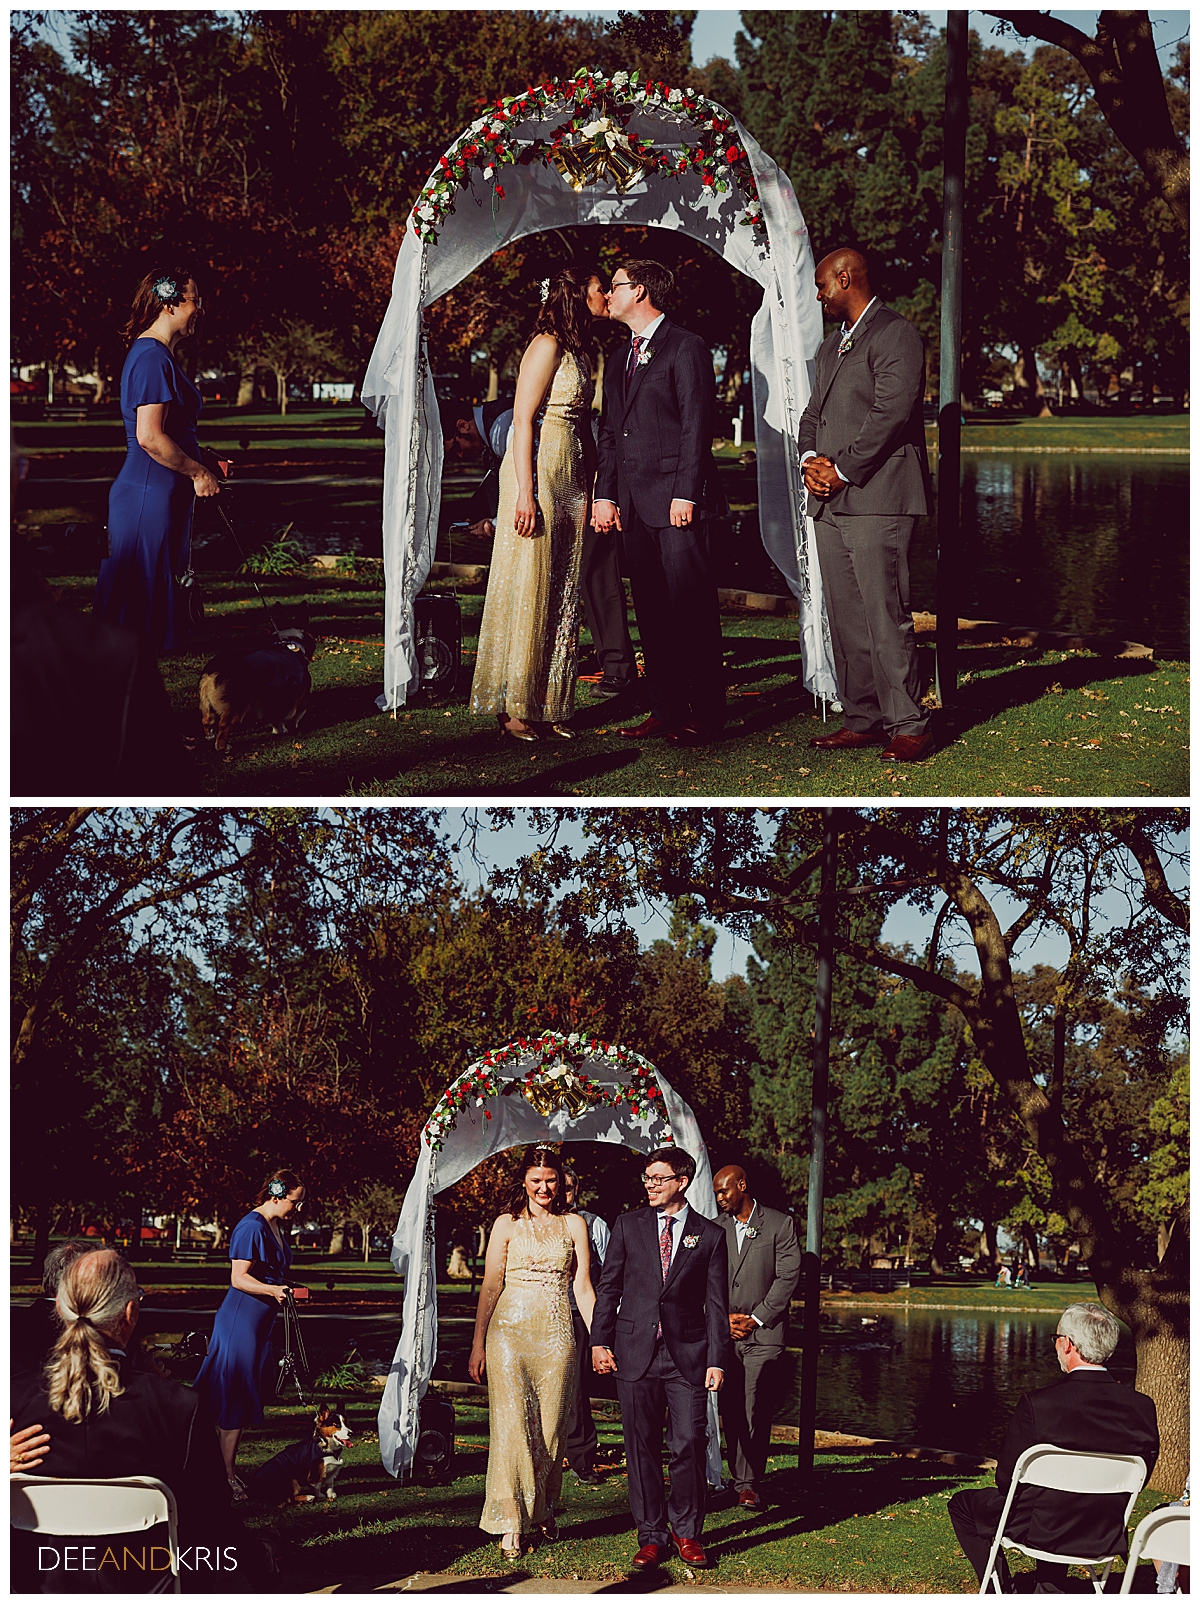 Two color images: Top image of first kiss. Bottom image of beginning recessional.